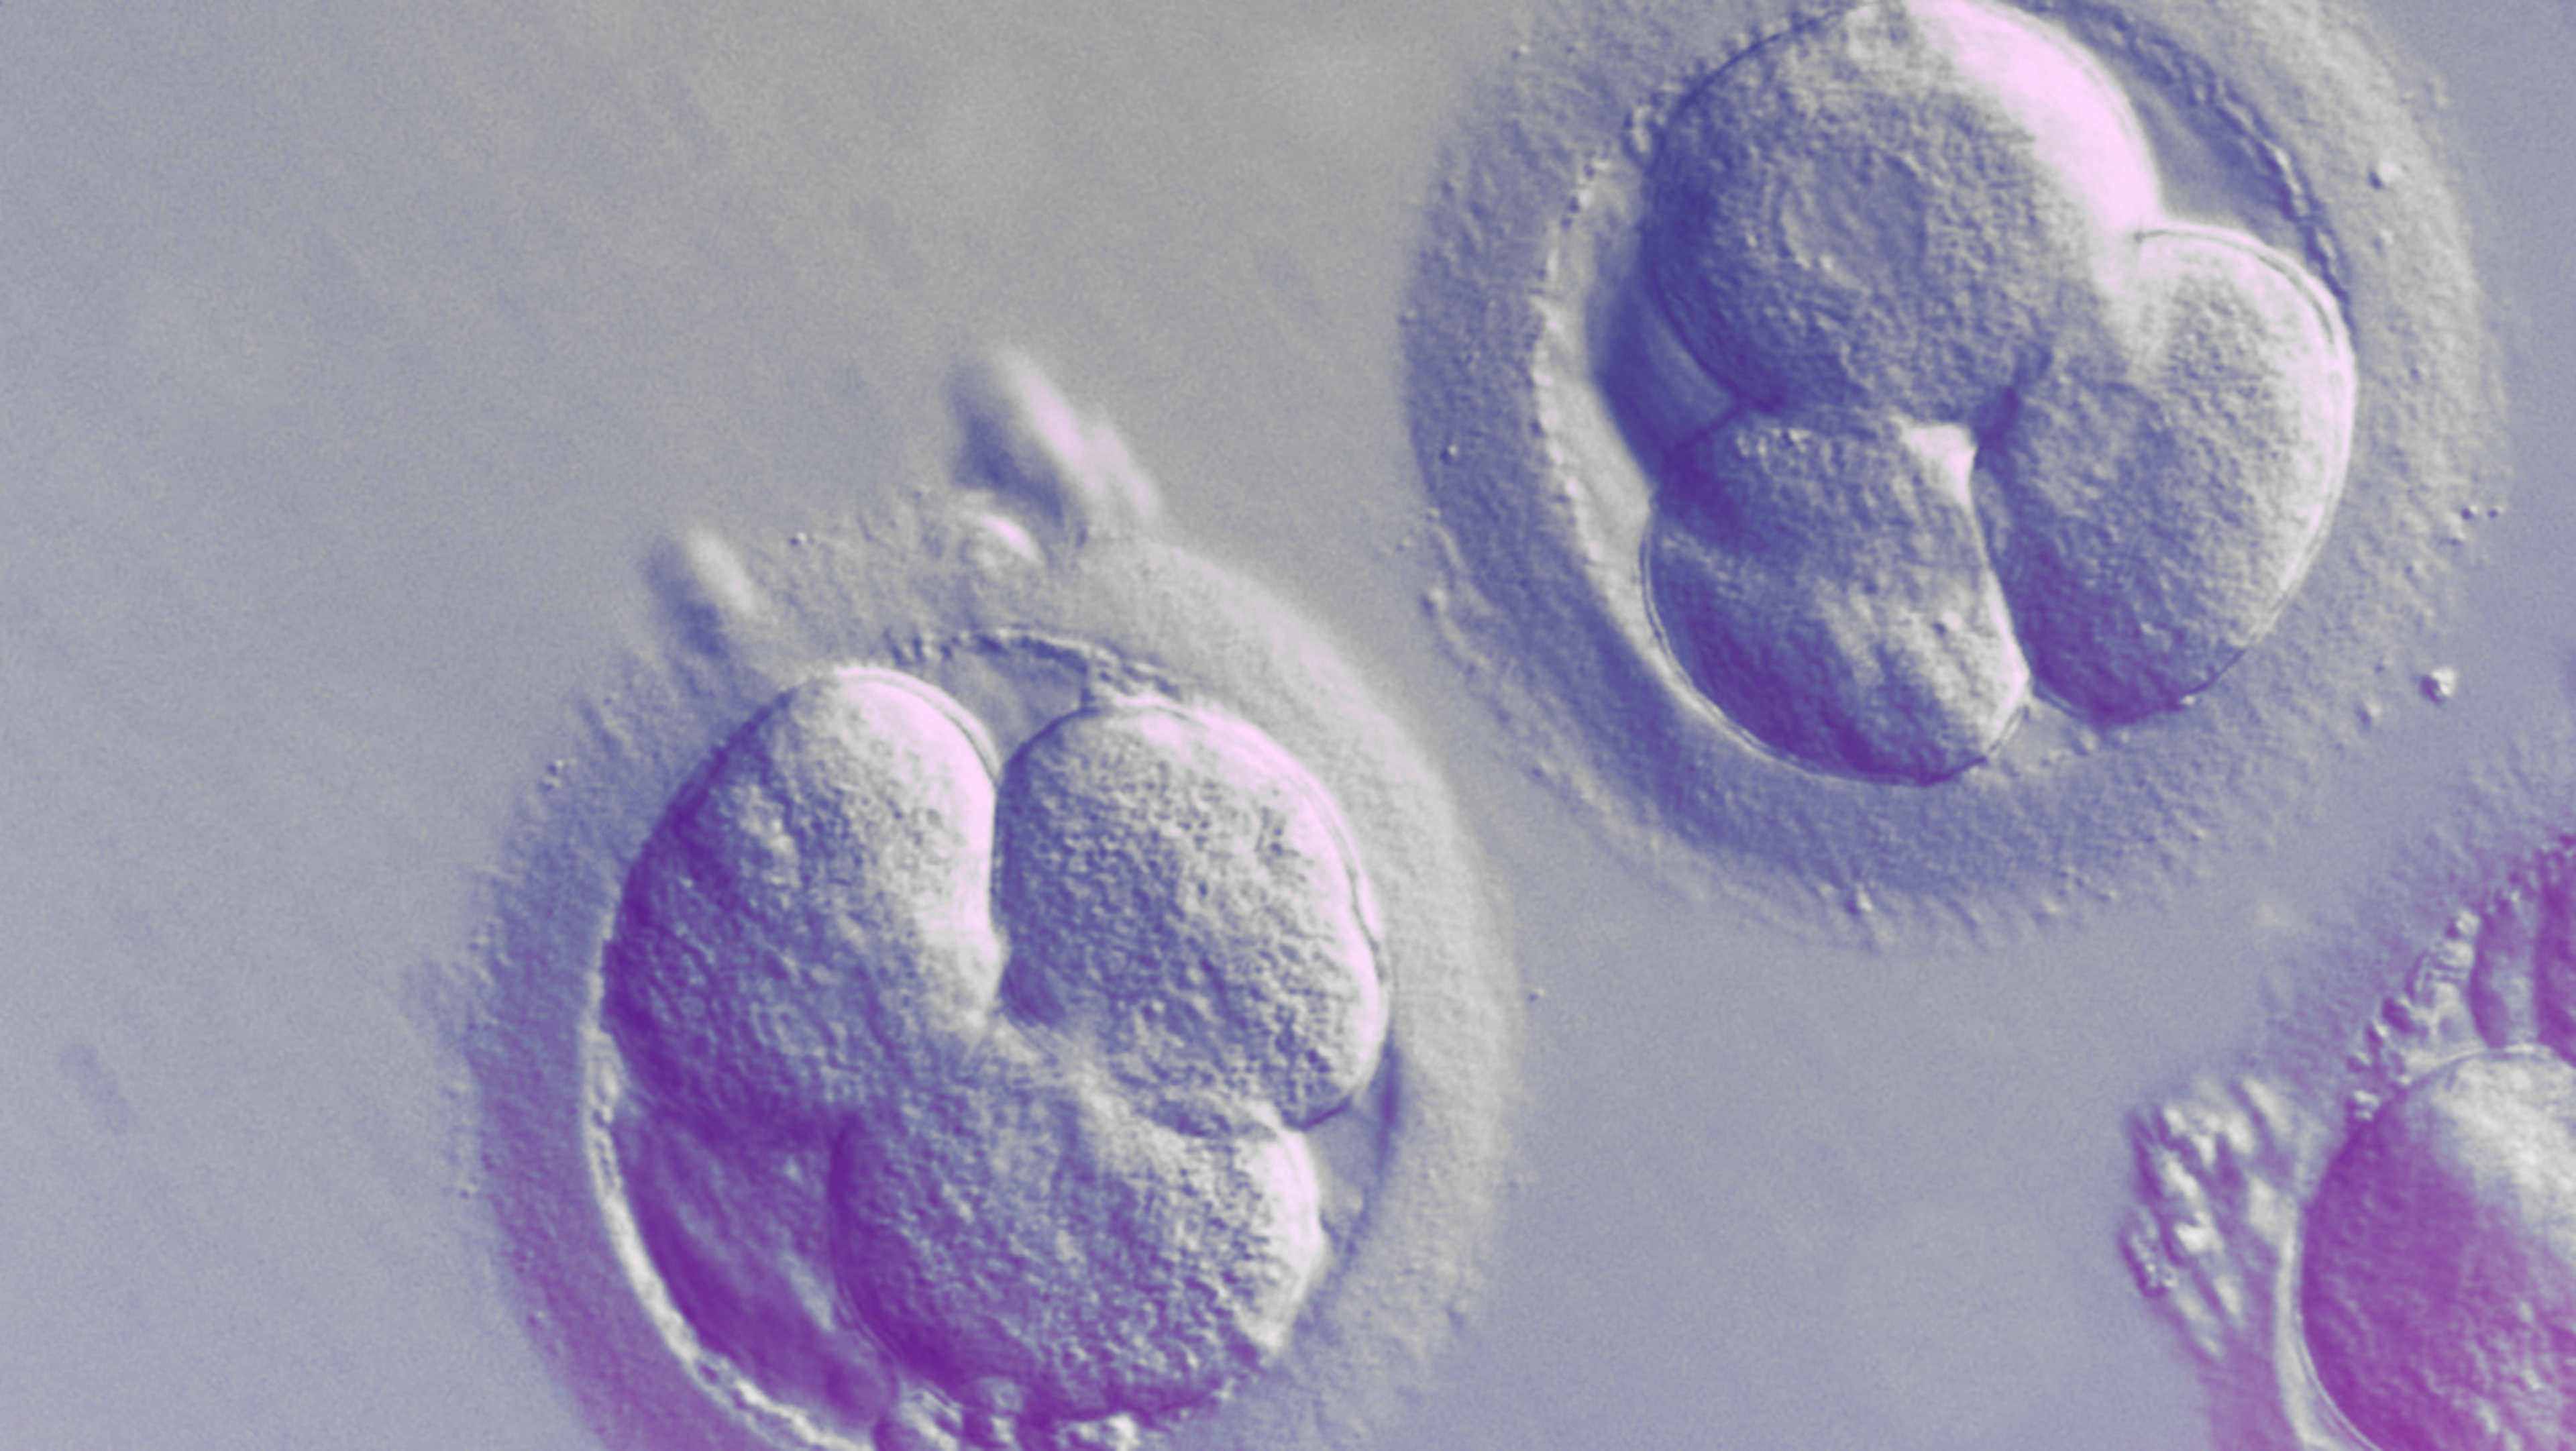 This is why scientists want to study human embryos beyond the 2-week limit